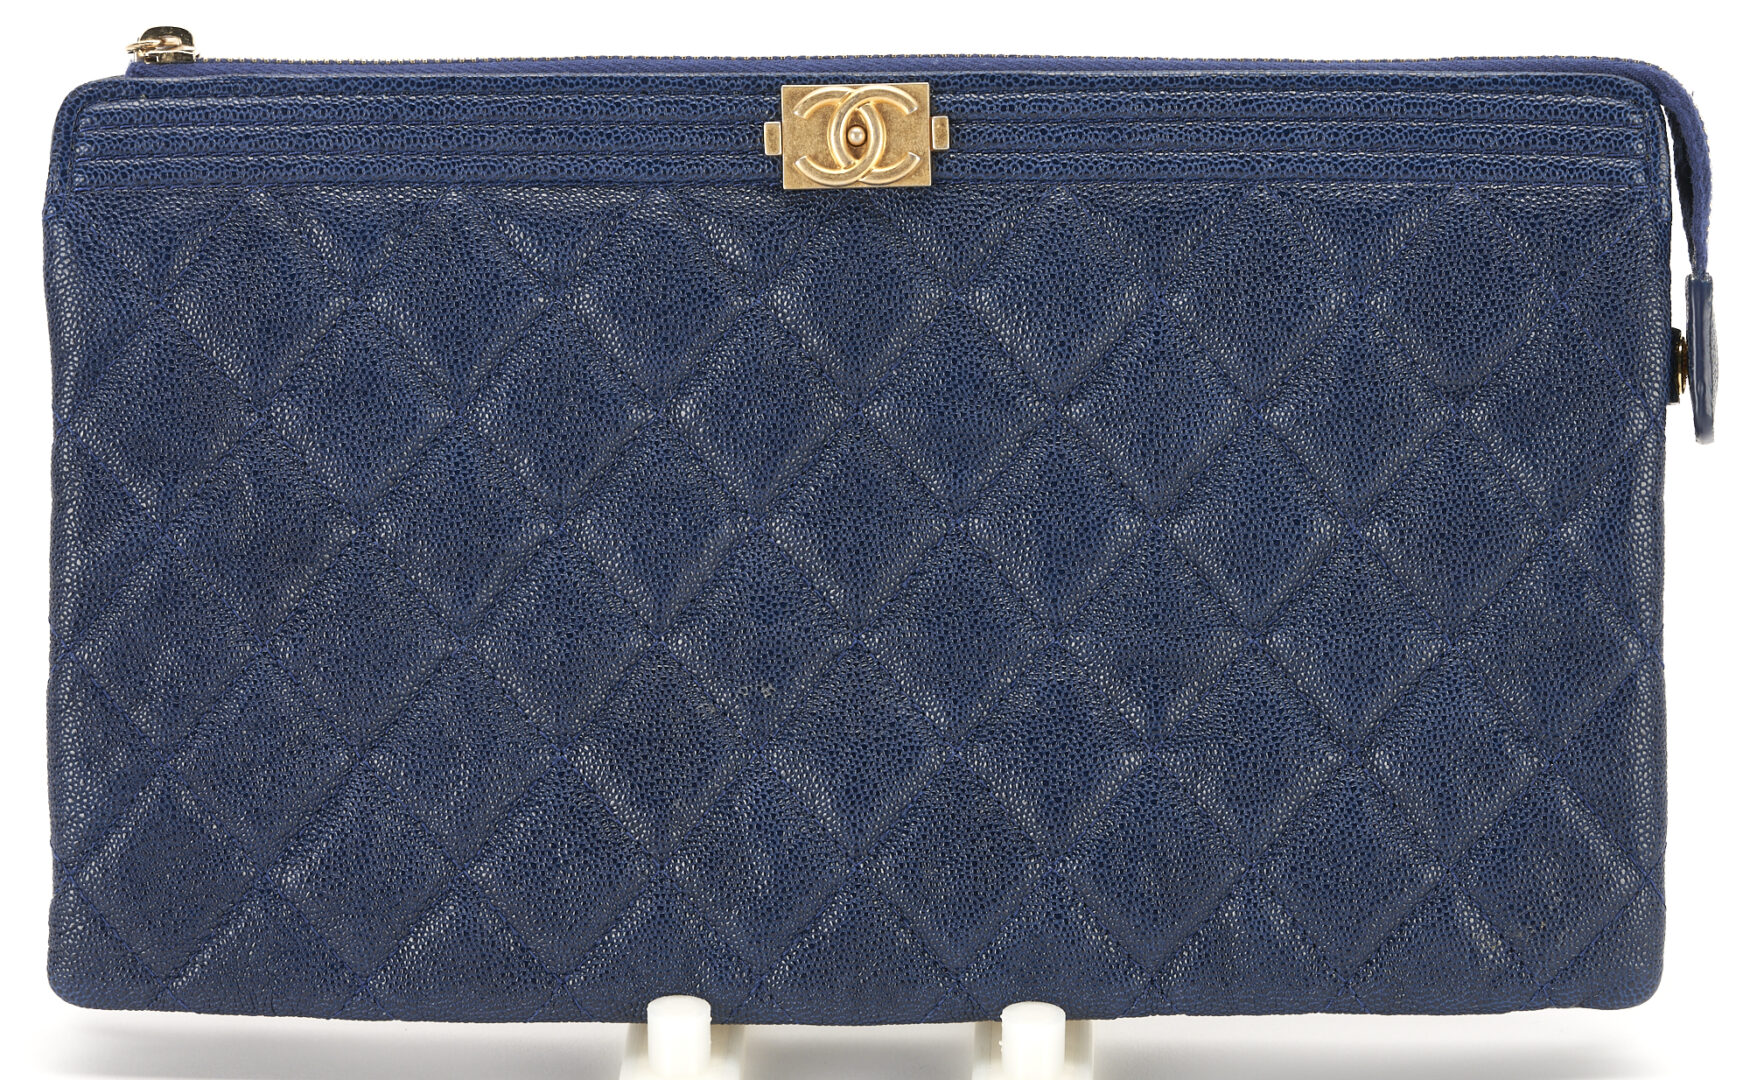 Lot 715: 2 Chanel Iridescent Caviar Quilted Clutches, Night by the C & Boy Pouch